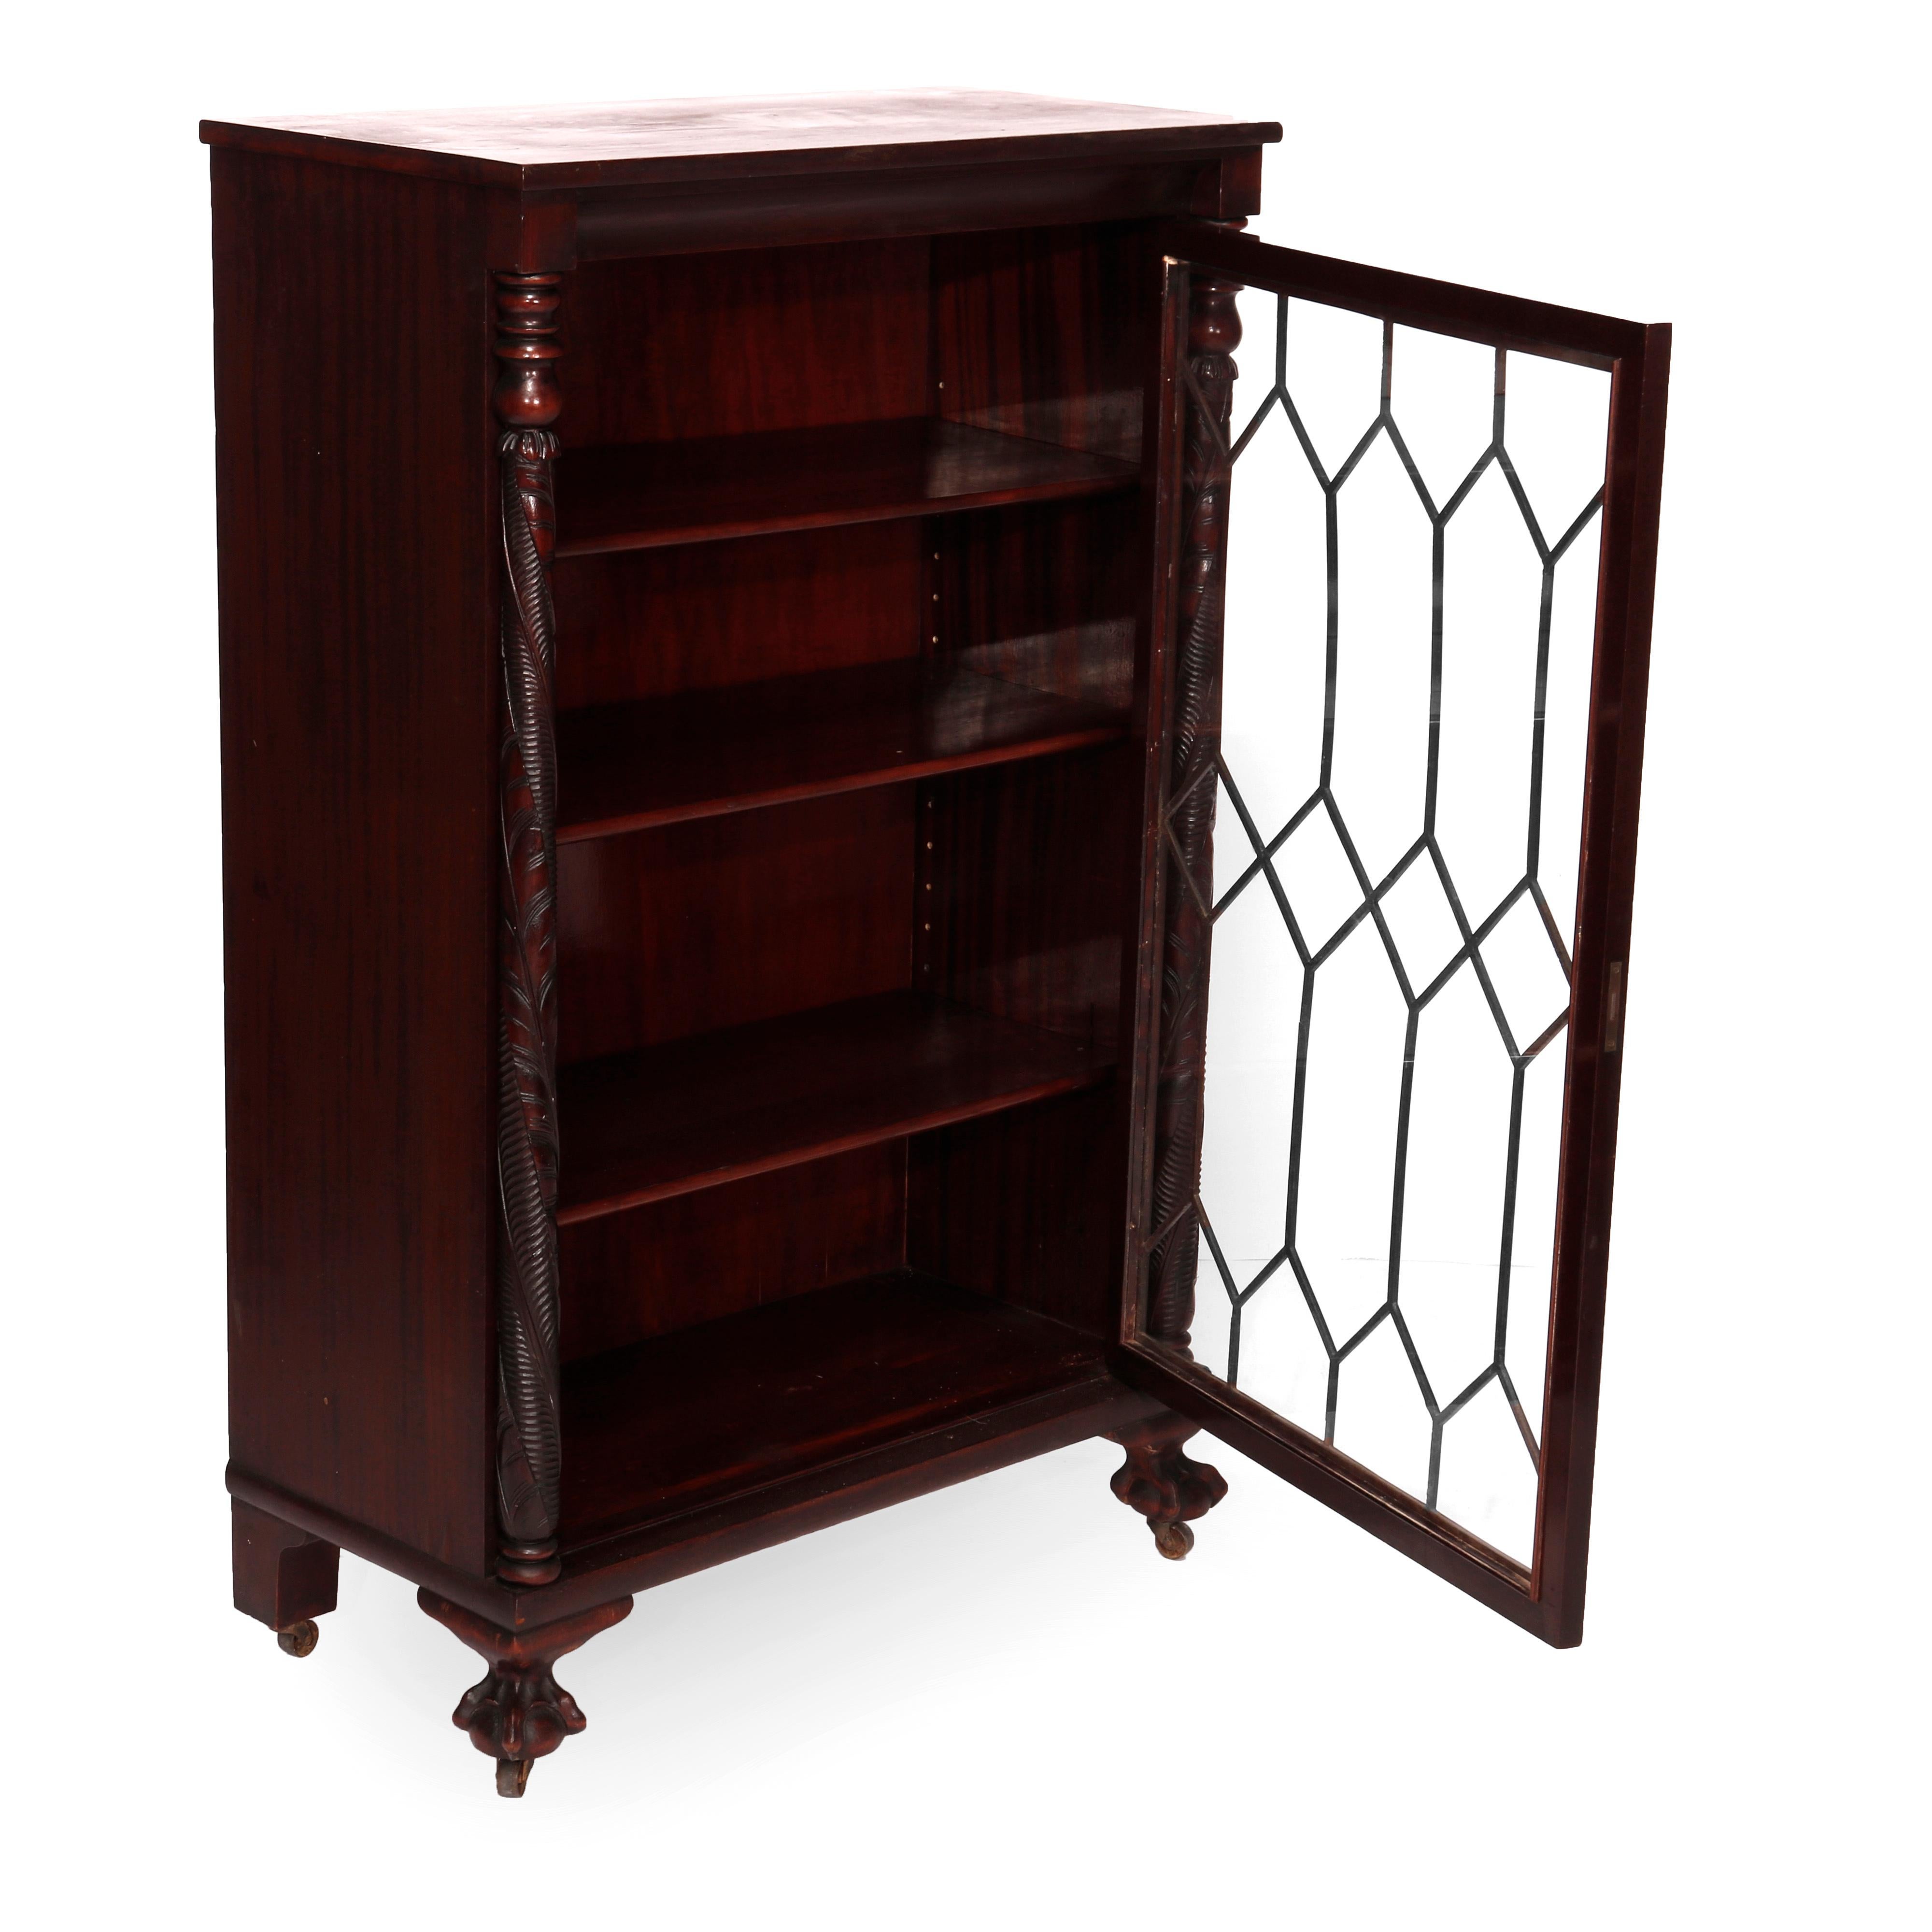 20th Century Antique Greco Classical American Empire Acanthus Carved Mahogany Bookcase, c1920